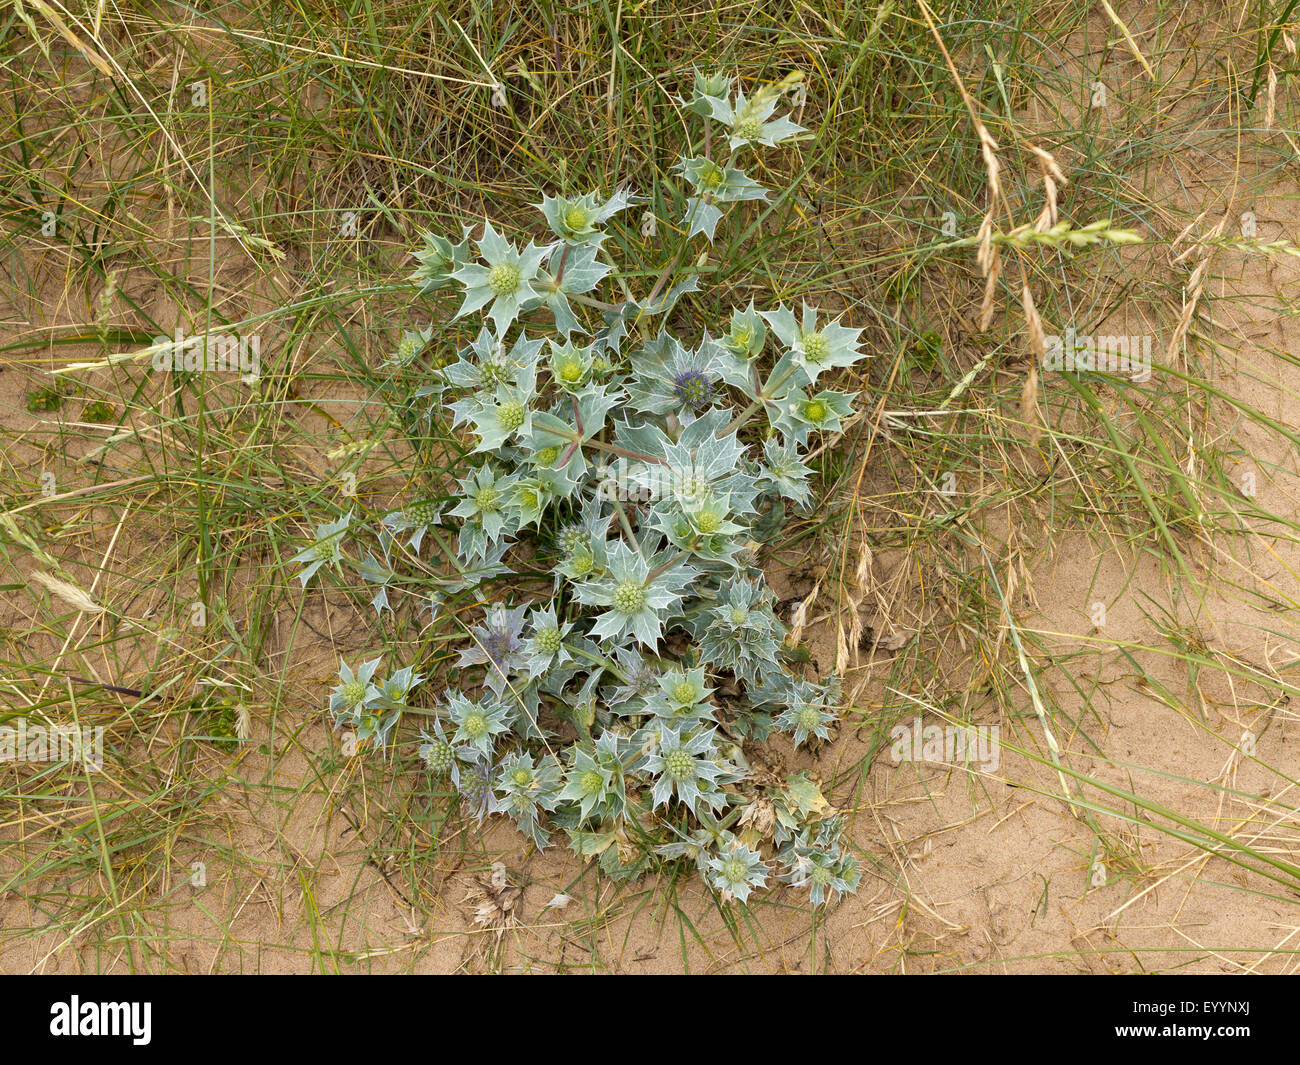 A close up of Eryngium on a grassy dune on a Norfolk beach, England Stock Photo